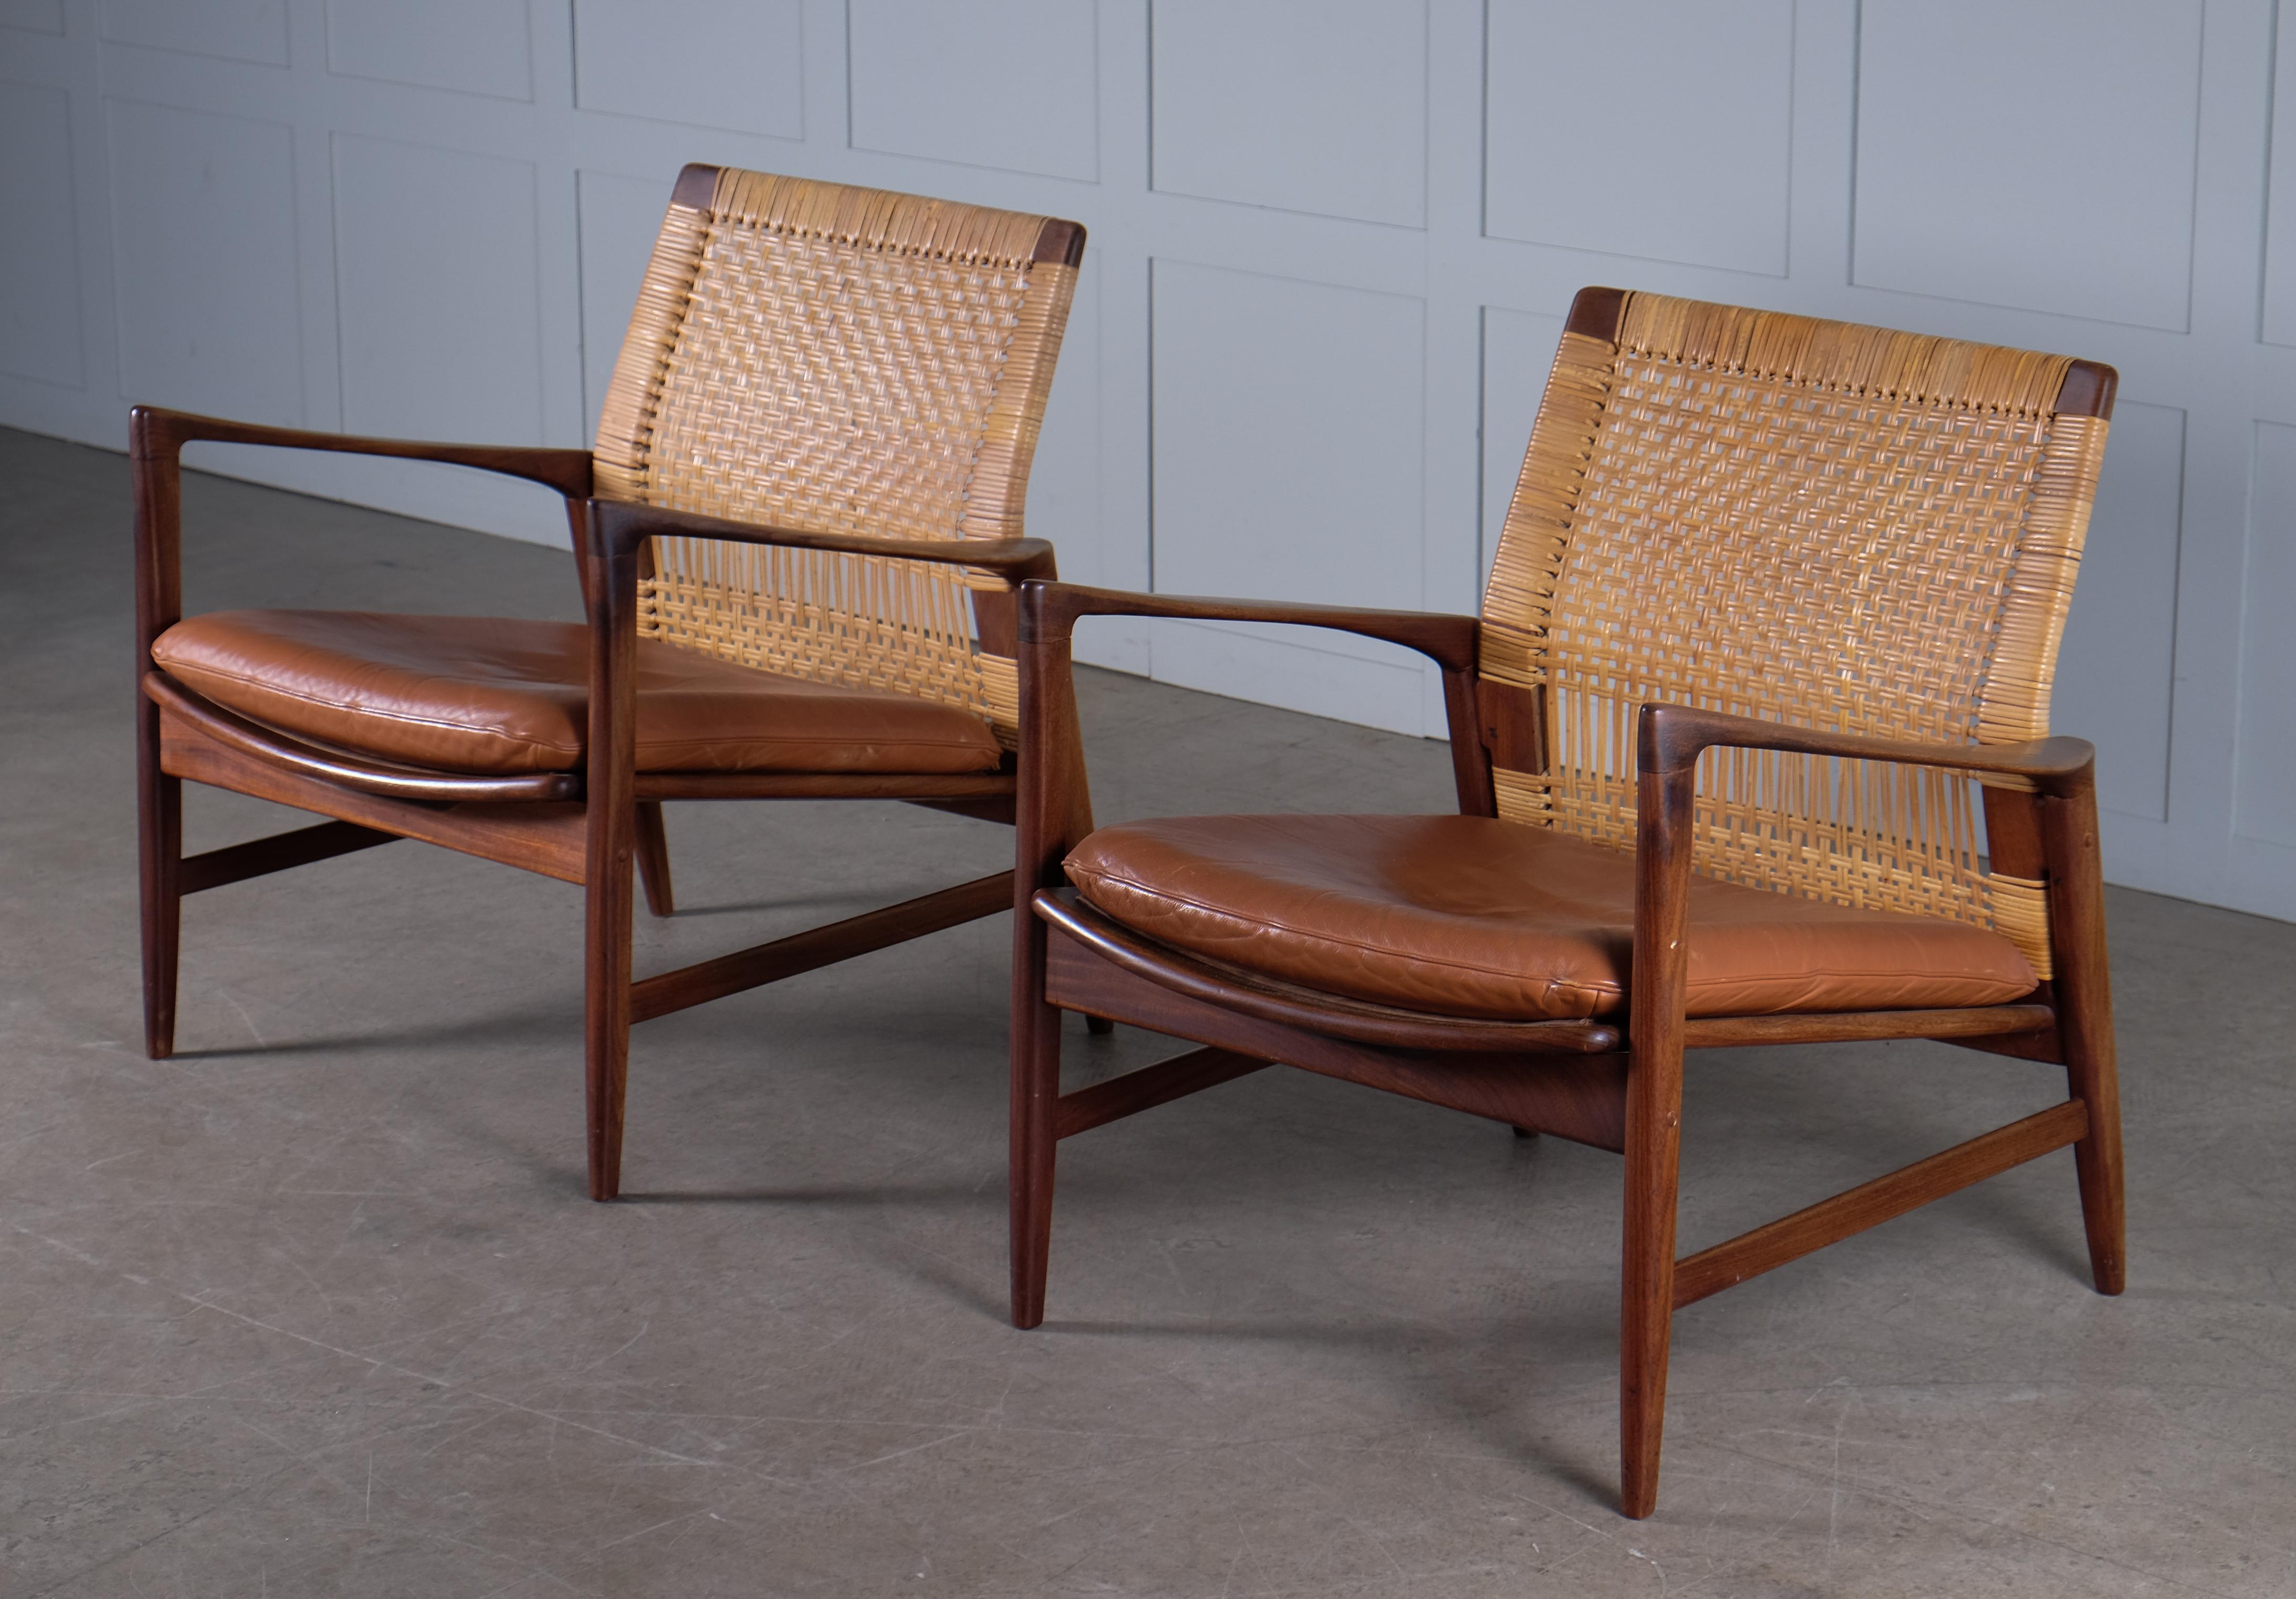 Rare model, produced by OPE, Sweden, 1960s.
Afromosia, rattan/cane and newly reupholstered cushions in leather.